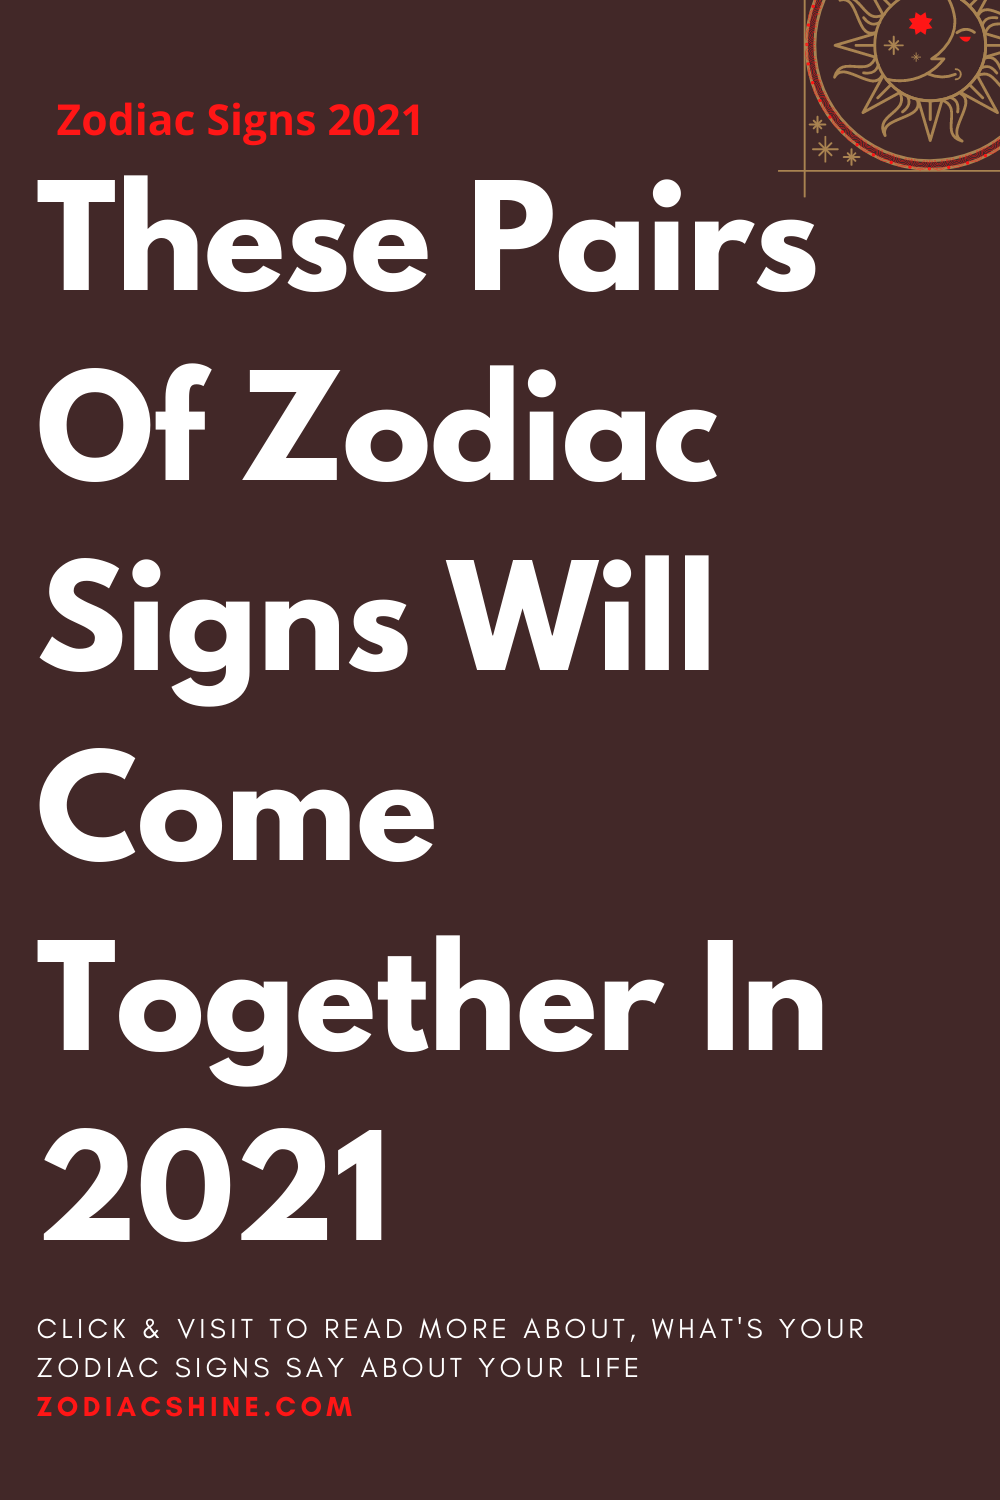 These Pairs Of Zodiac Signs Will Come Together In 2021